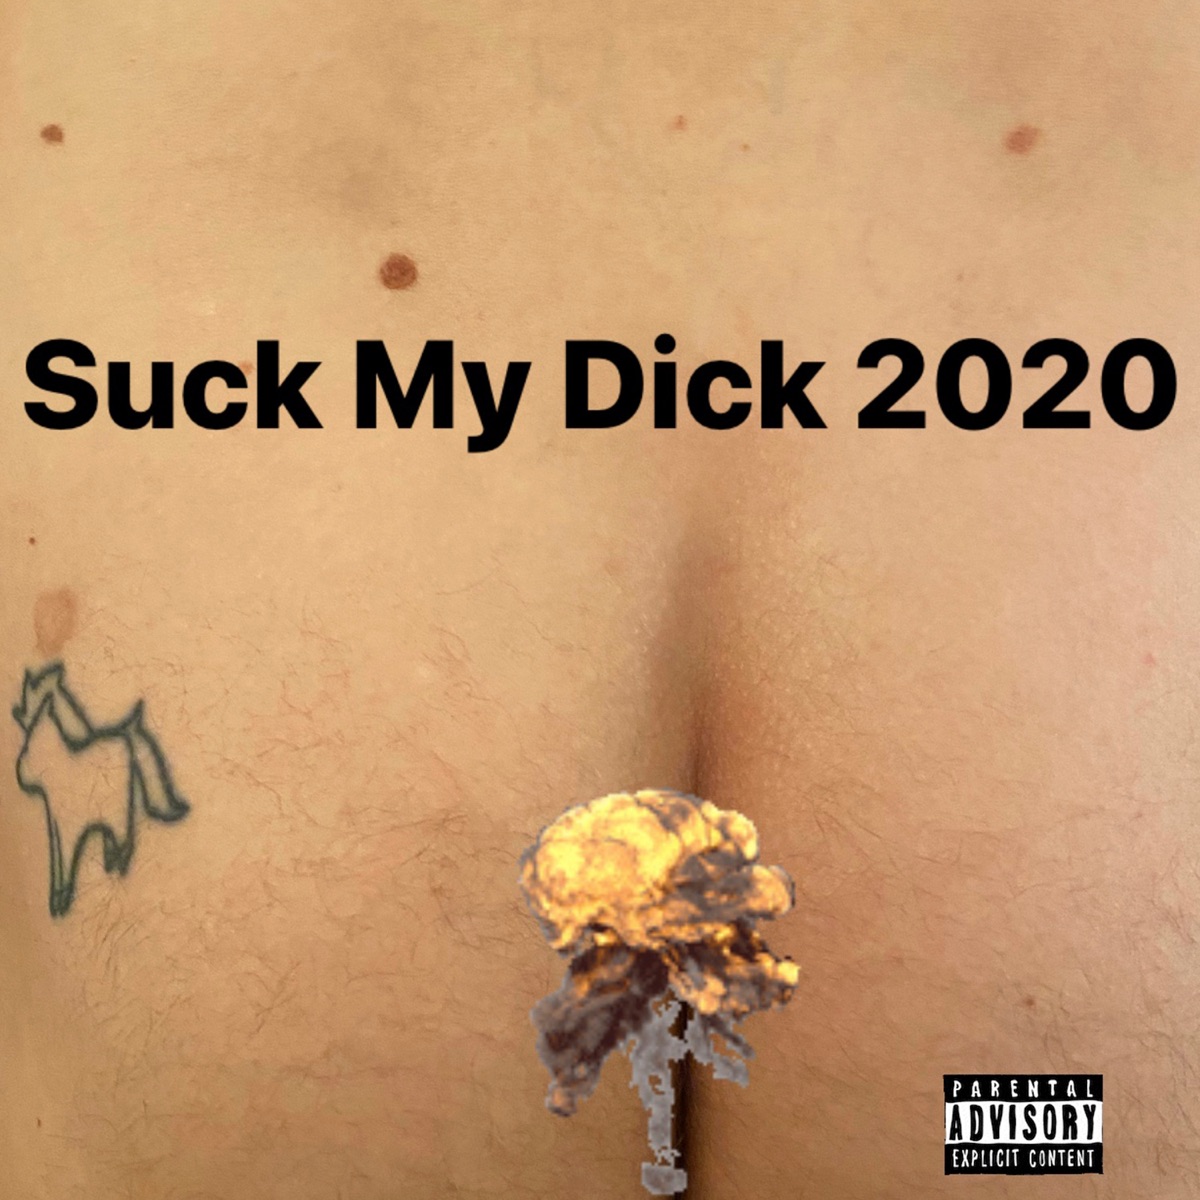 declan shannon recommends come suck my dick pic